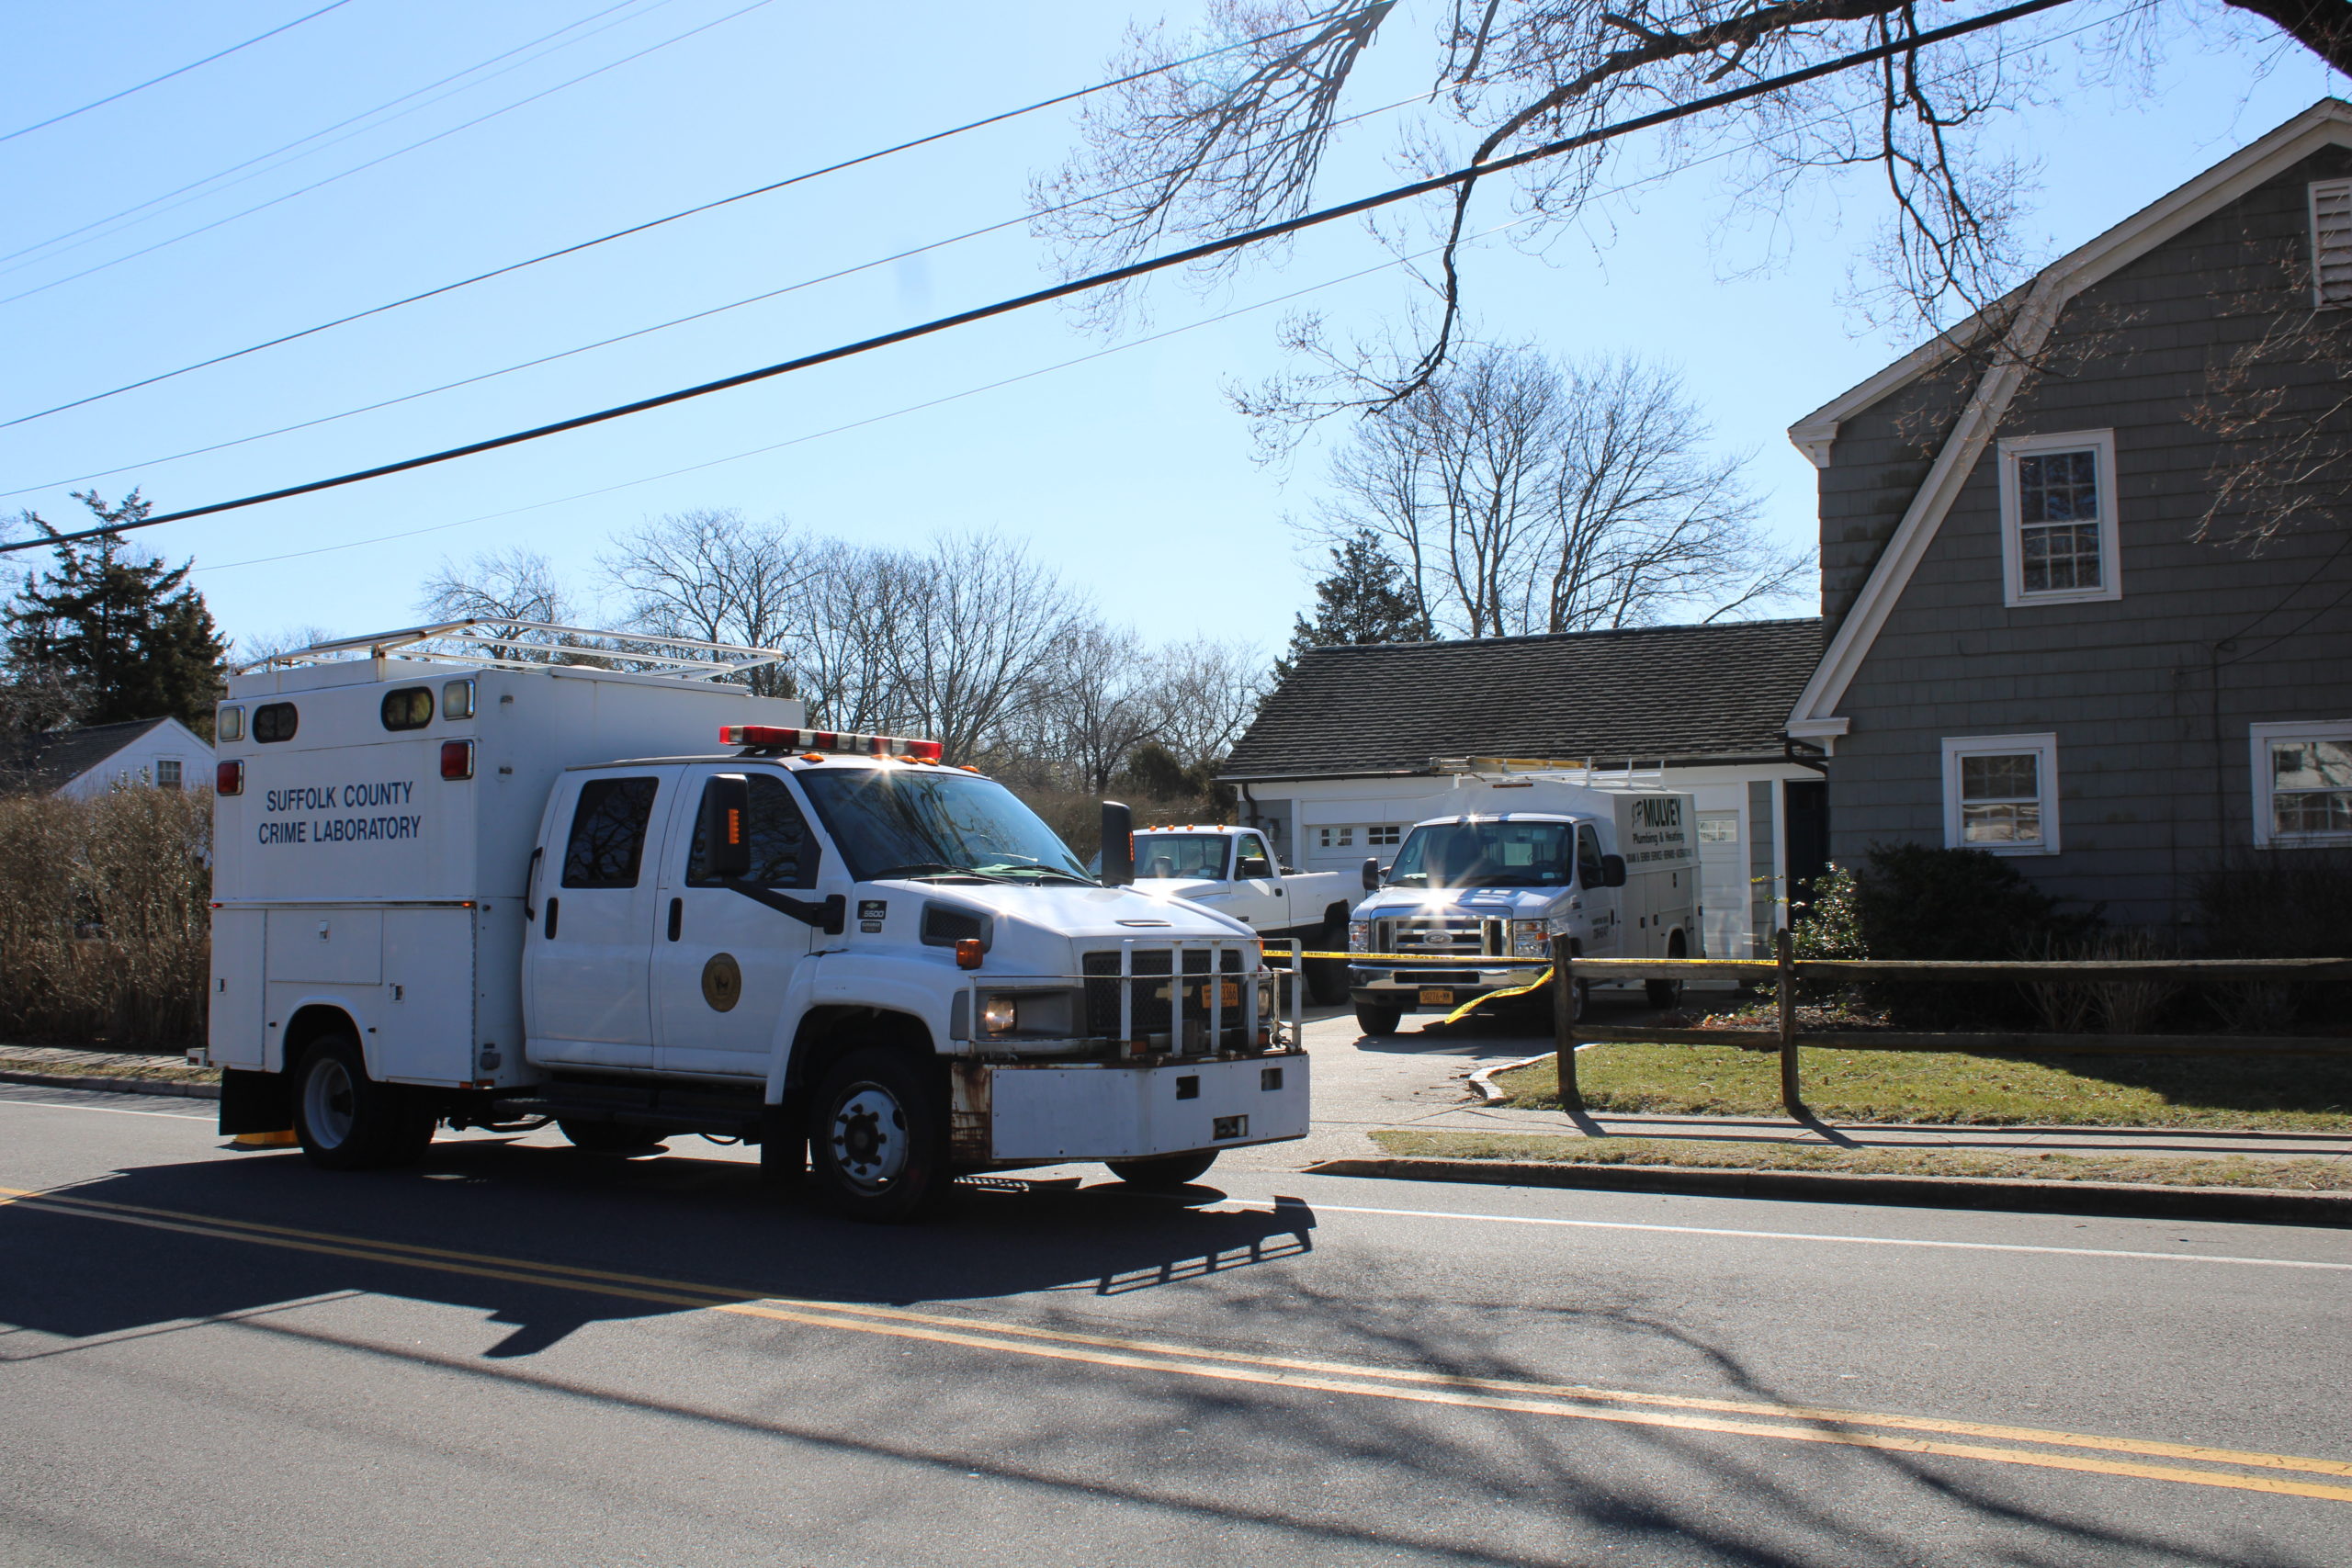 Southampton Town and Suffolk County Police were on the scene Thursday morning of a double shooting that took place on Wednesday night that left two people dead in Hampton Bays.